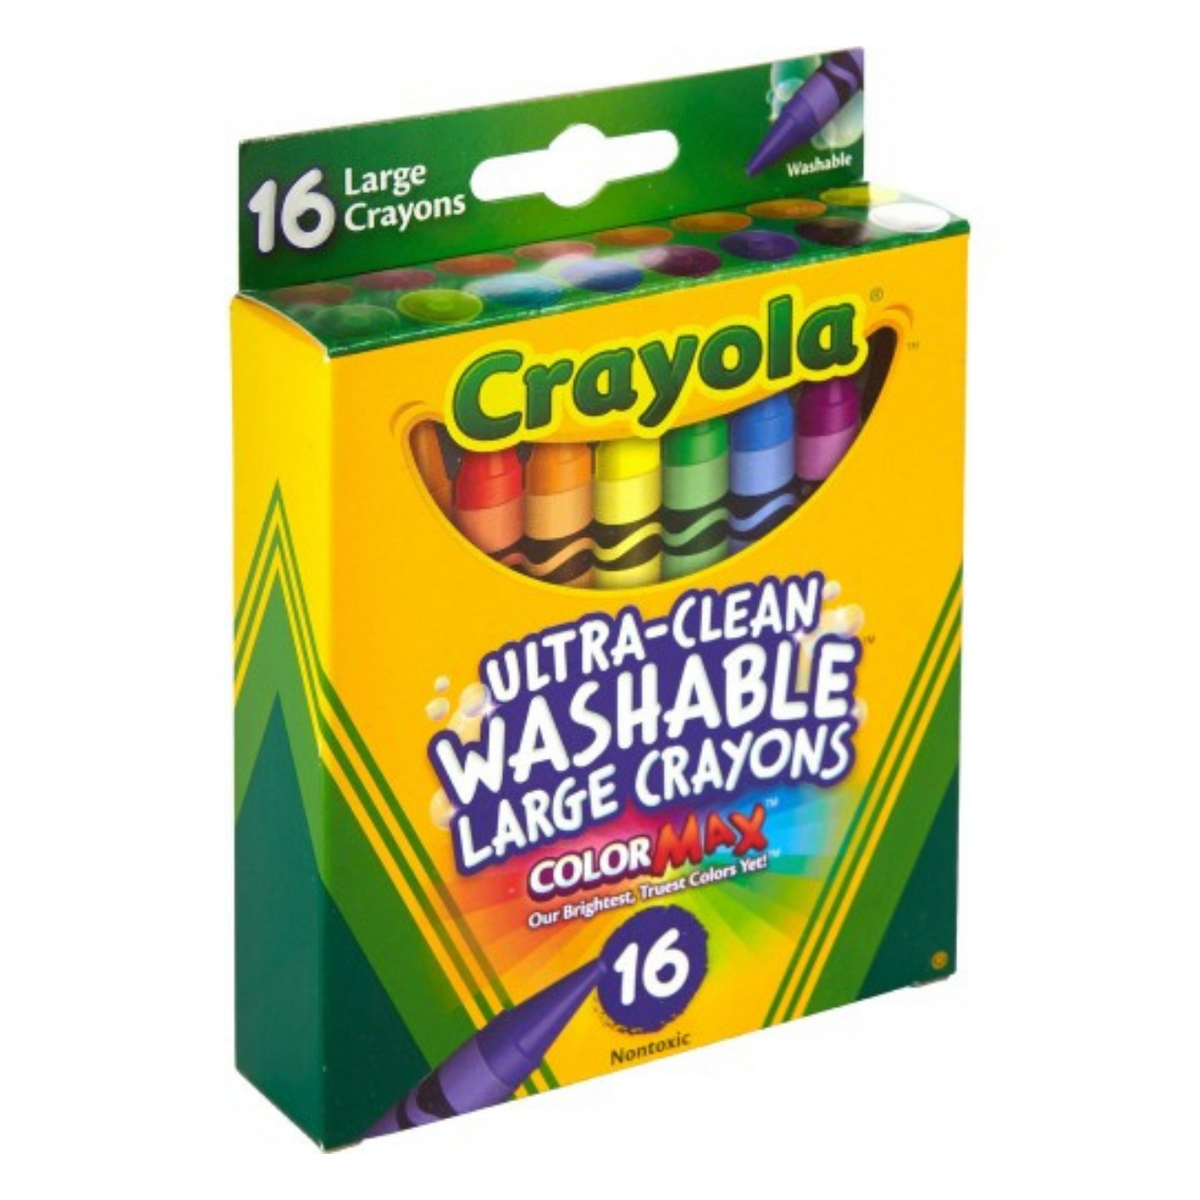 Crayola Large Washable Crayons (16 Count) – Child's Play